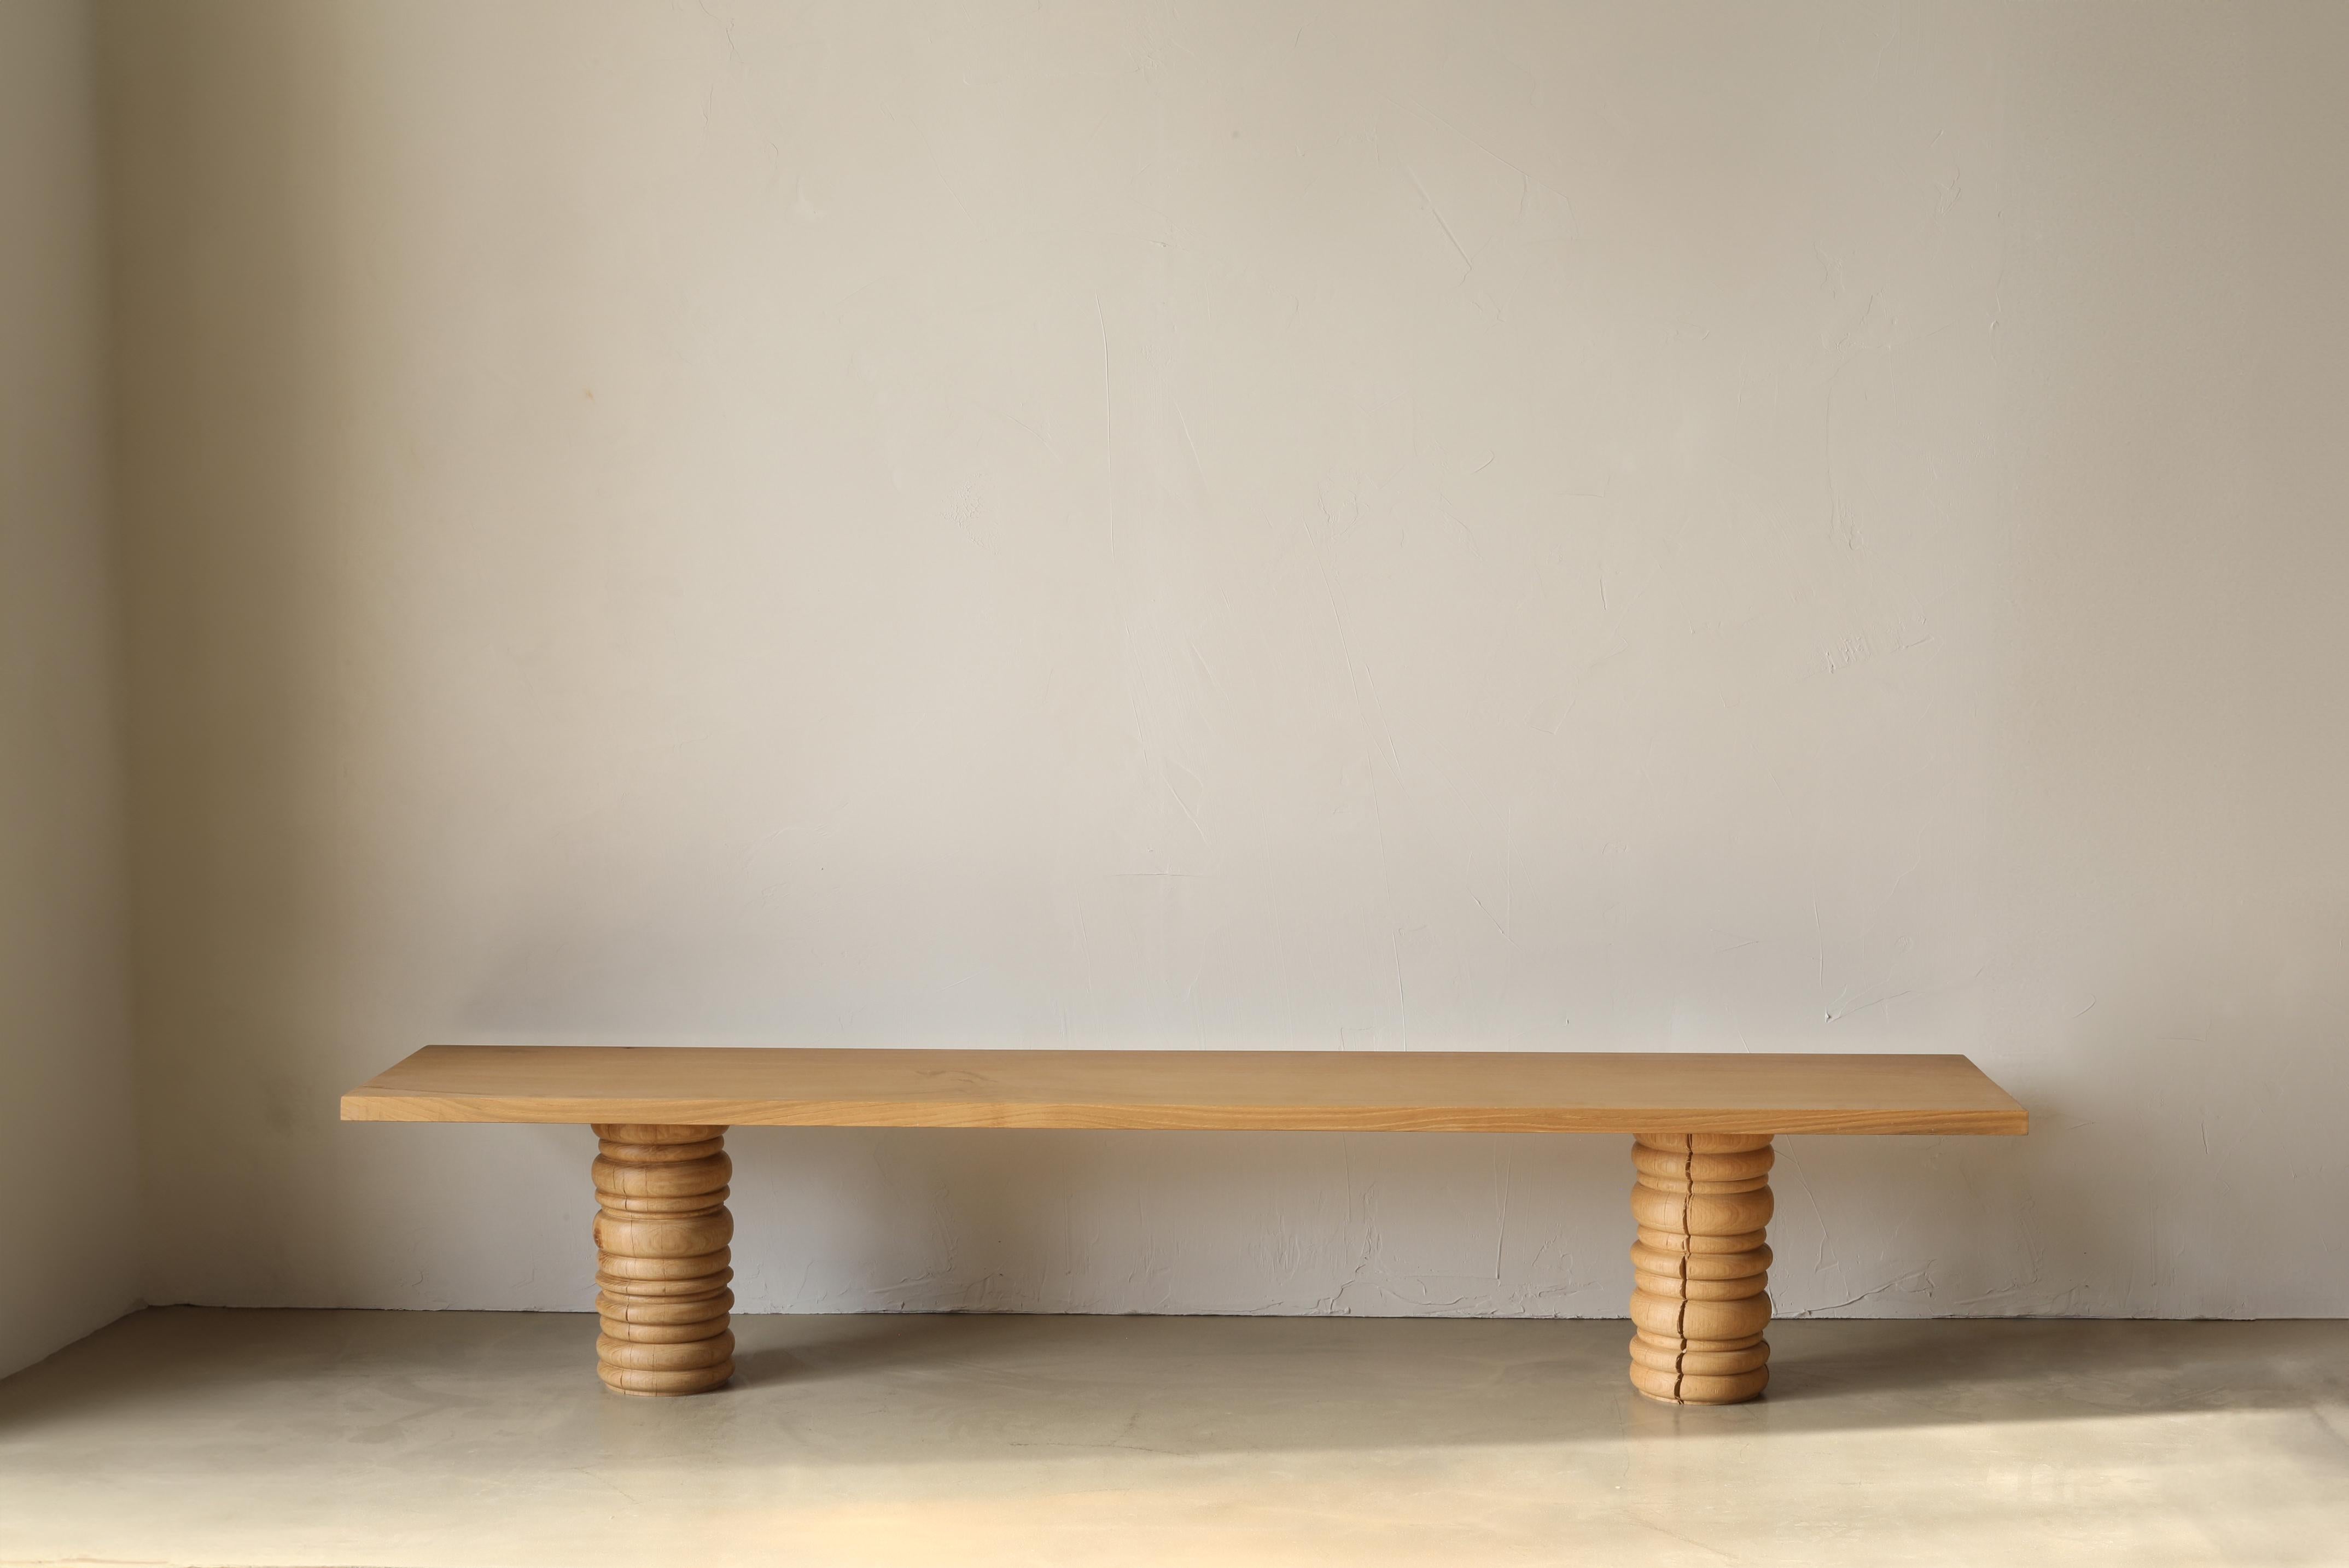 The Bead Bench is made up of turned pedestal bases for legs and a clean solid oak top. The Bead collection plays with the ornate nature of beaded turning techniques while establishing an indistinguishable pattern. Custom lengths are available.